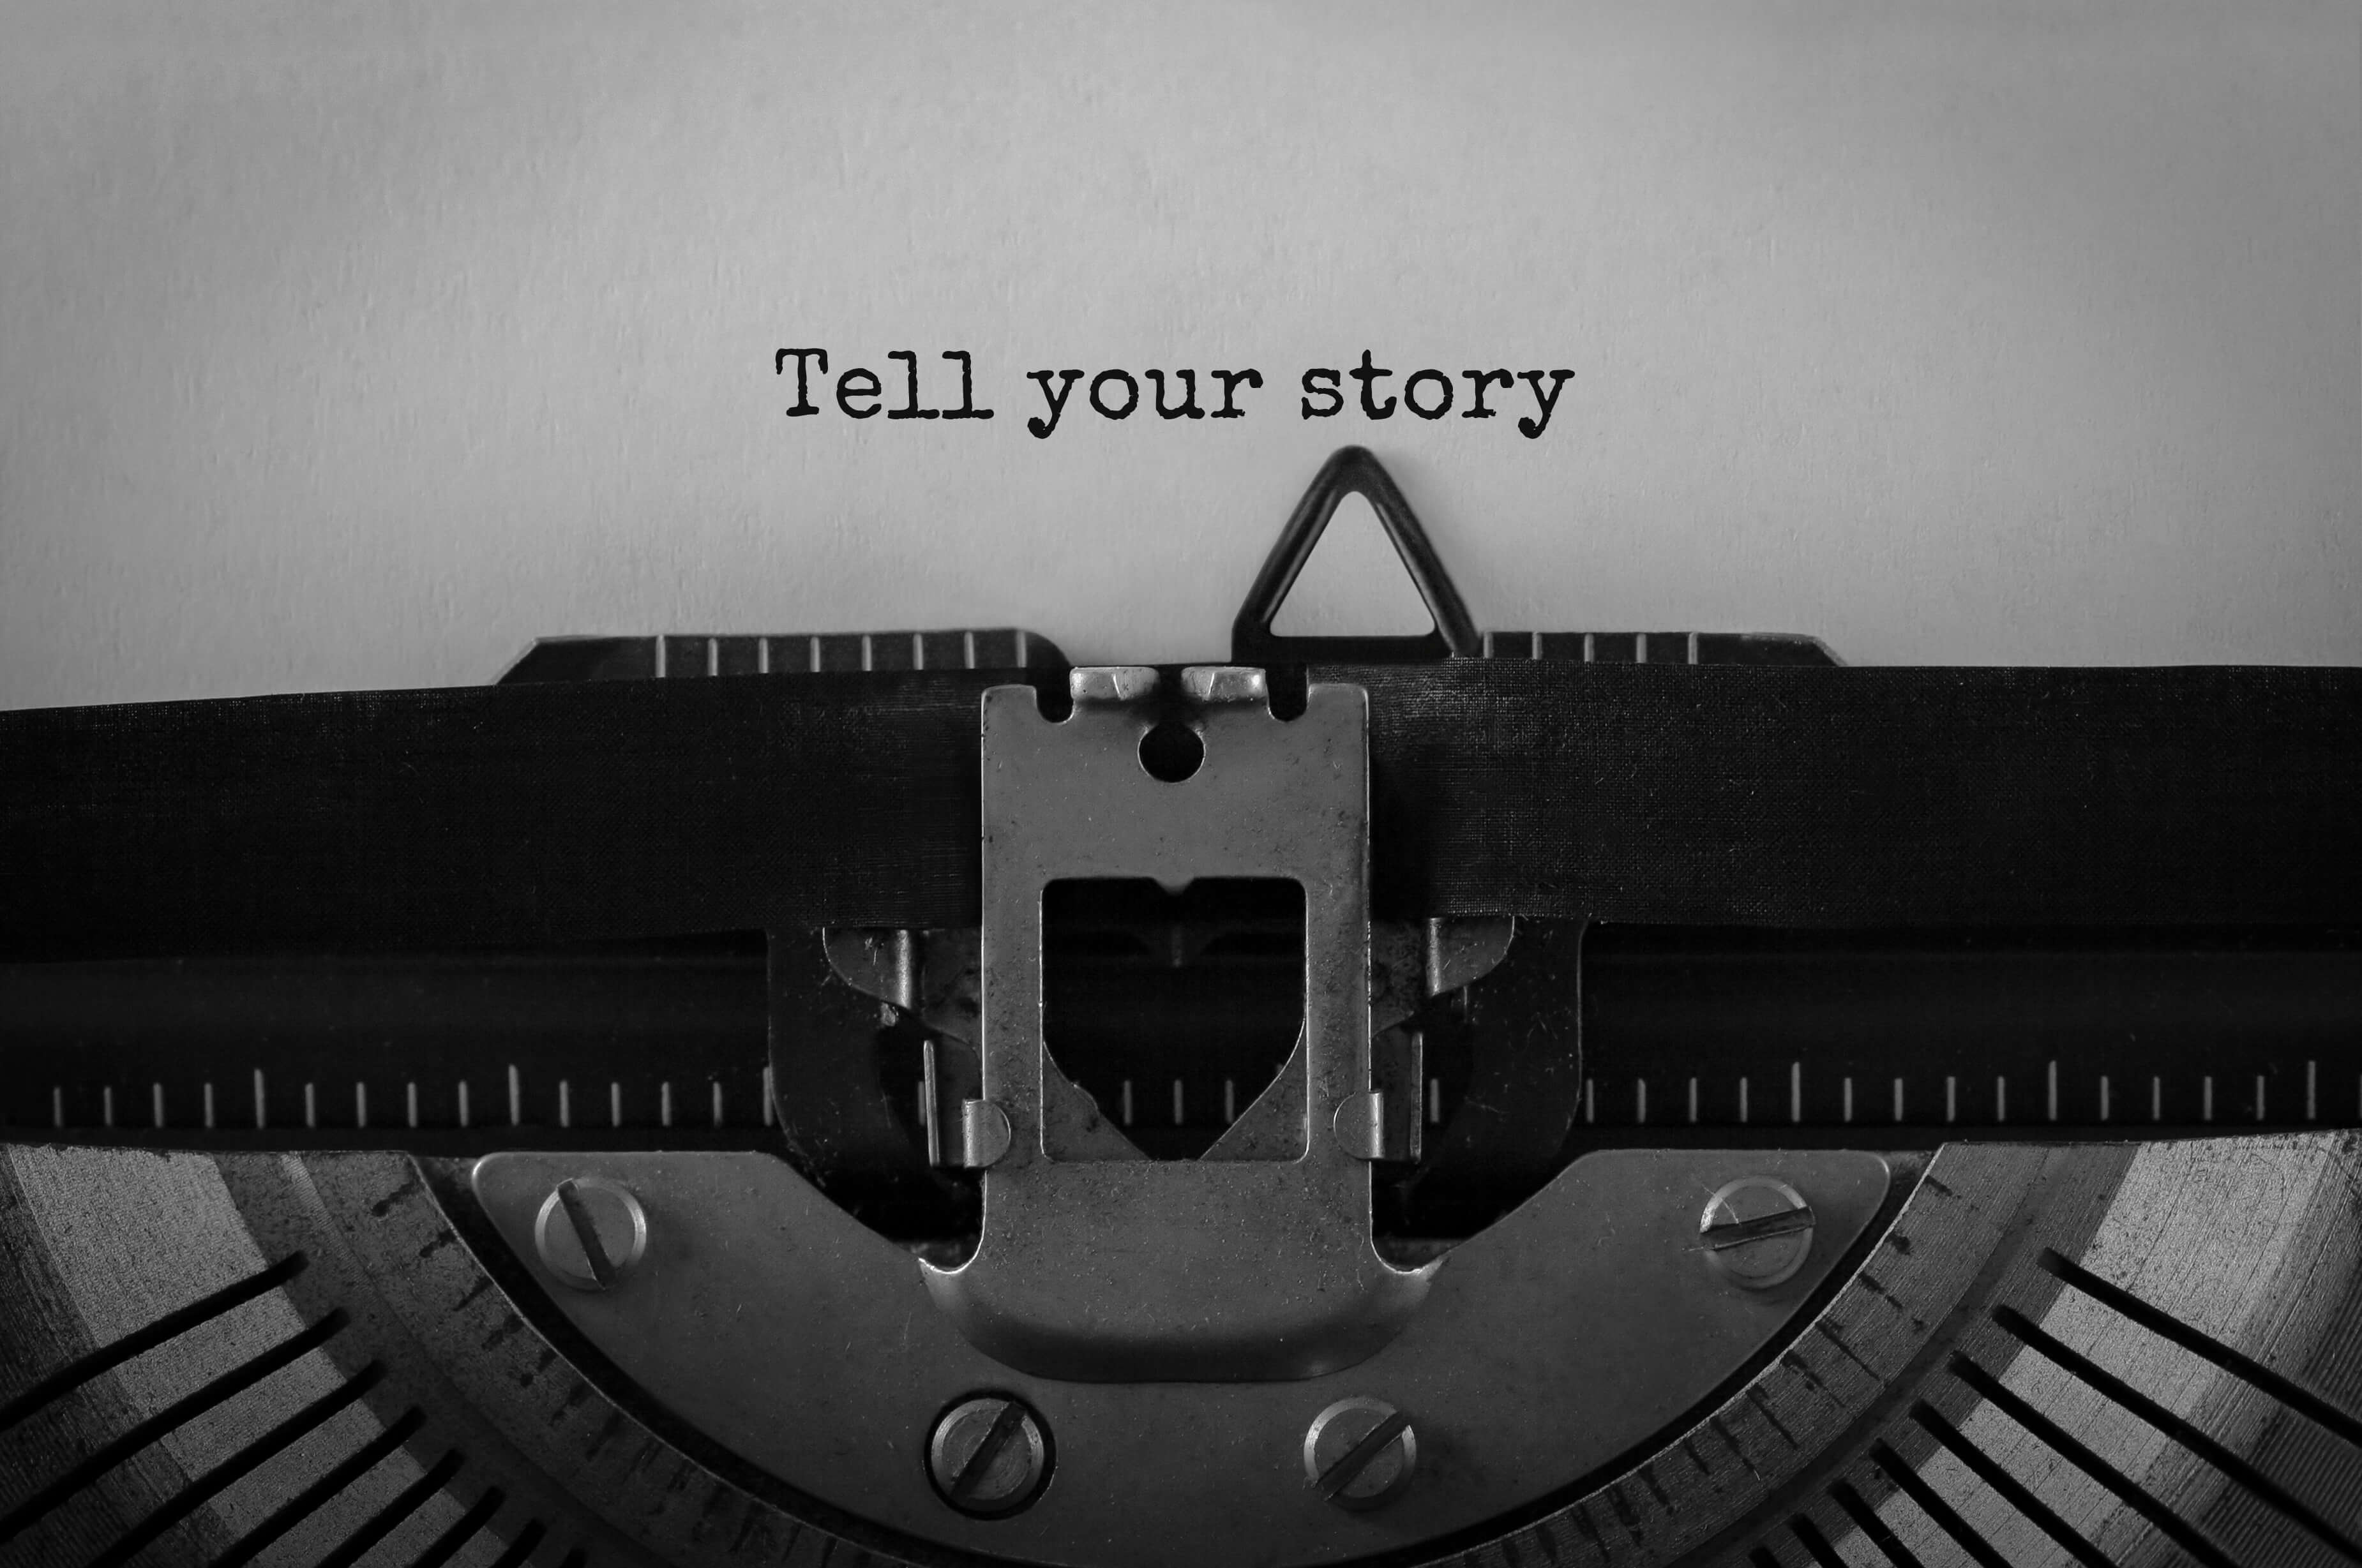 Tell your story on typewriter